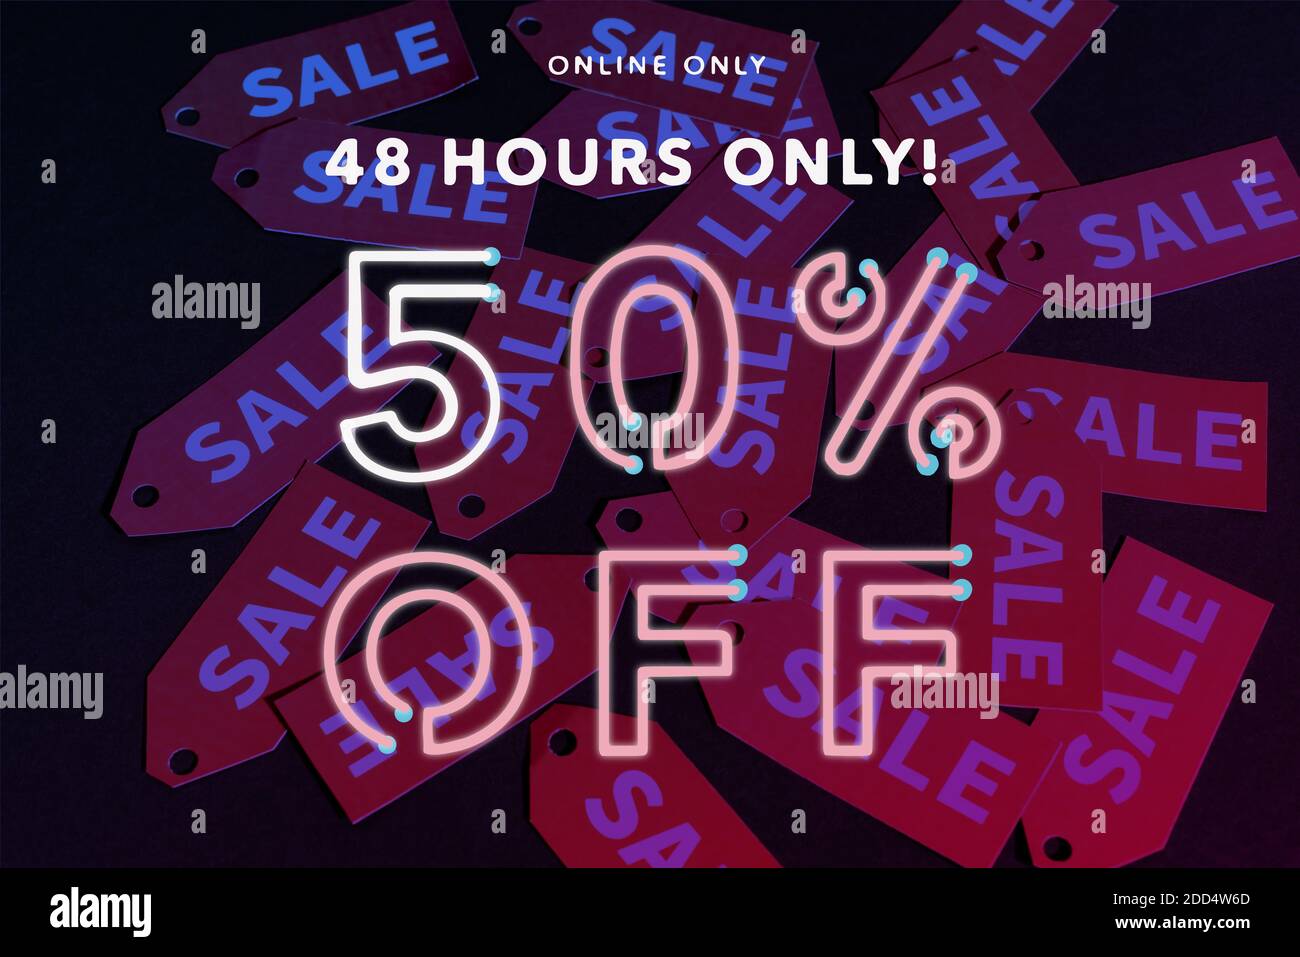 online only, 48 hours only, 50 percent off lettering near red labels on black background Stock Photo